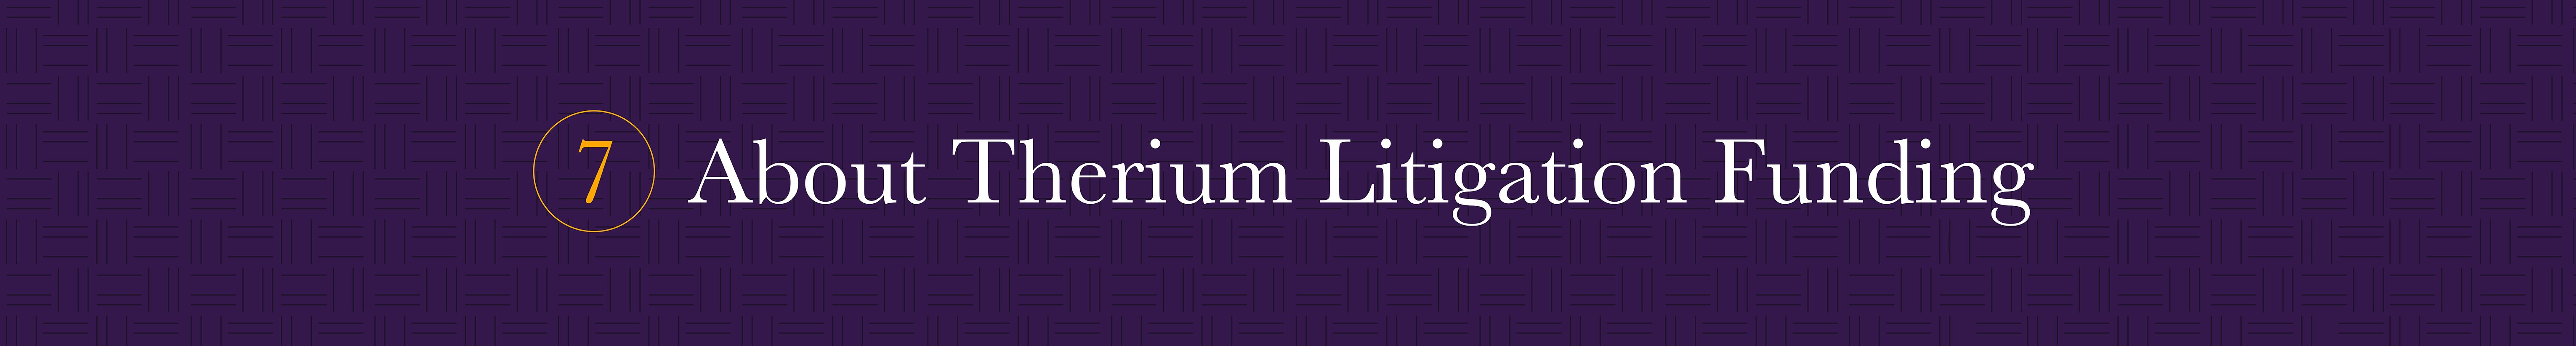 About-Therium-litigation-funding